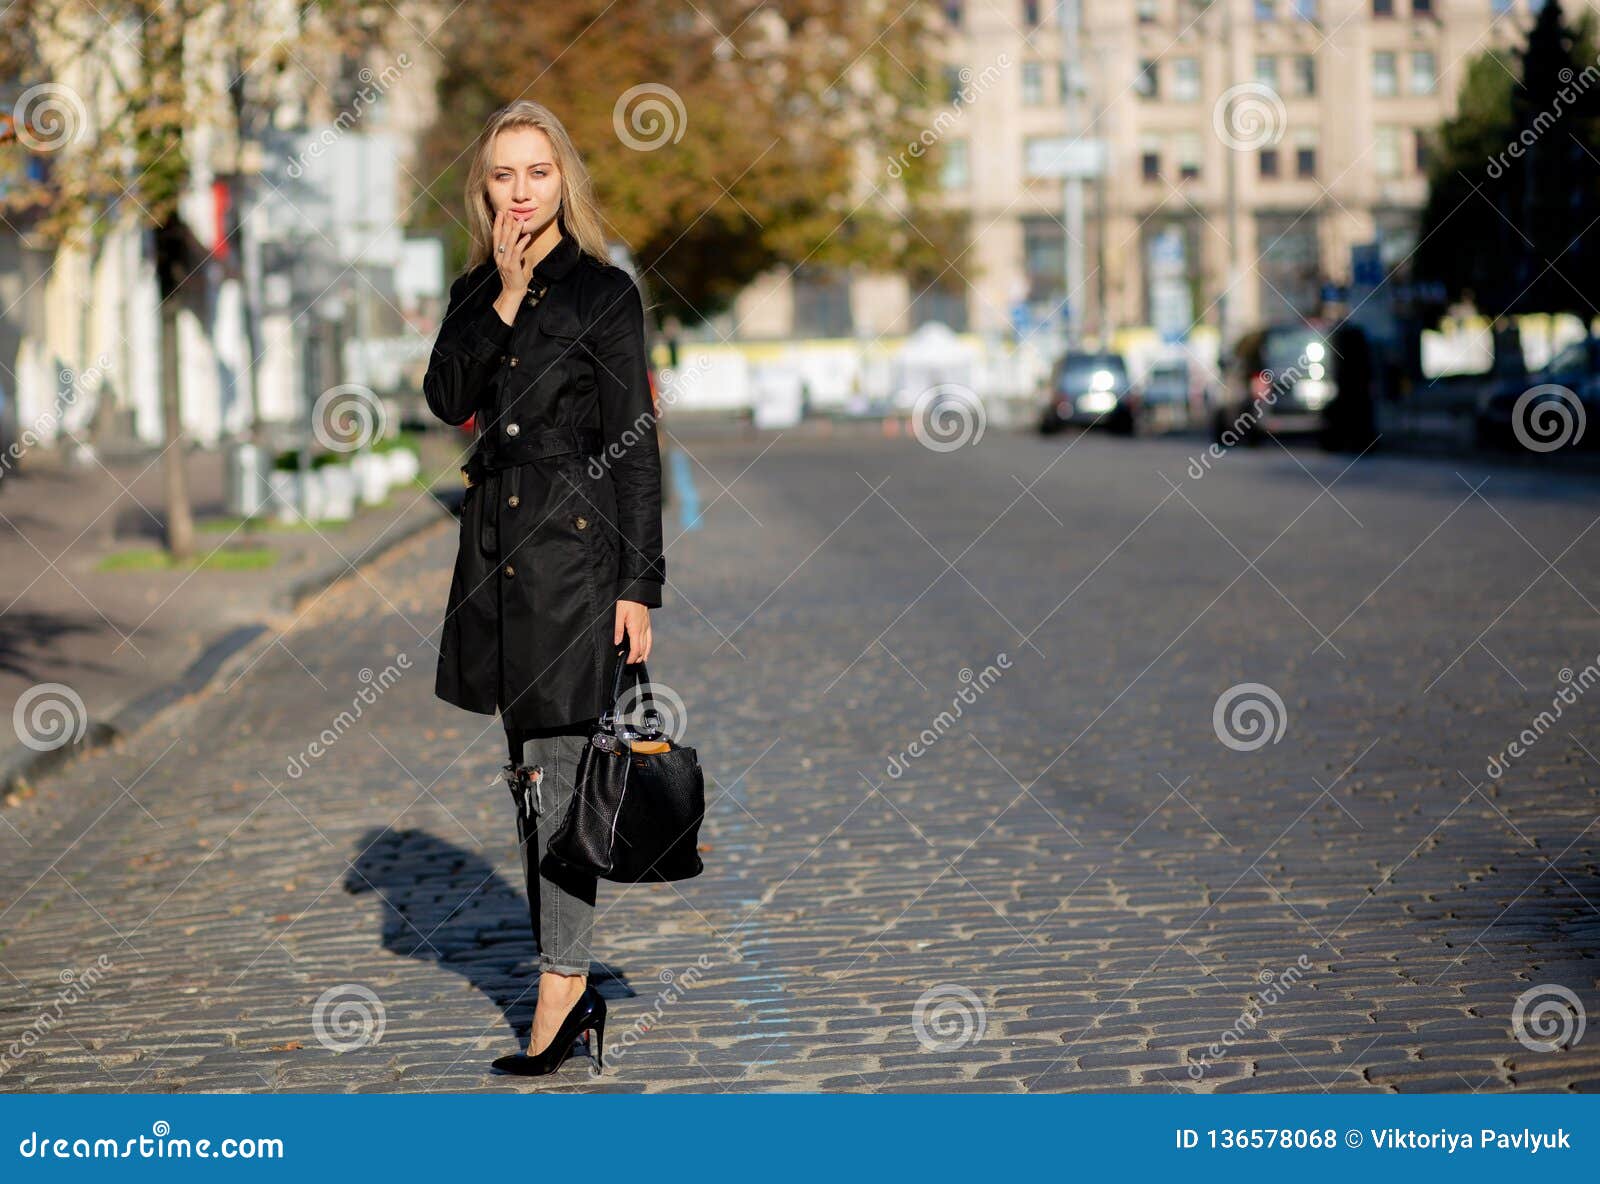 Beautiful Fashionable Caucasian Blonde Woman With Big Breast Walking In The  Street, Wearing Round Sunglasses, Shiny Golden Dress, Black Stylish Coat  Holding Small Bag. Fashion Urban Spring Photo. Stock Photo, Picture and